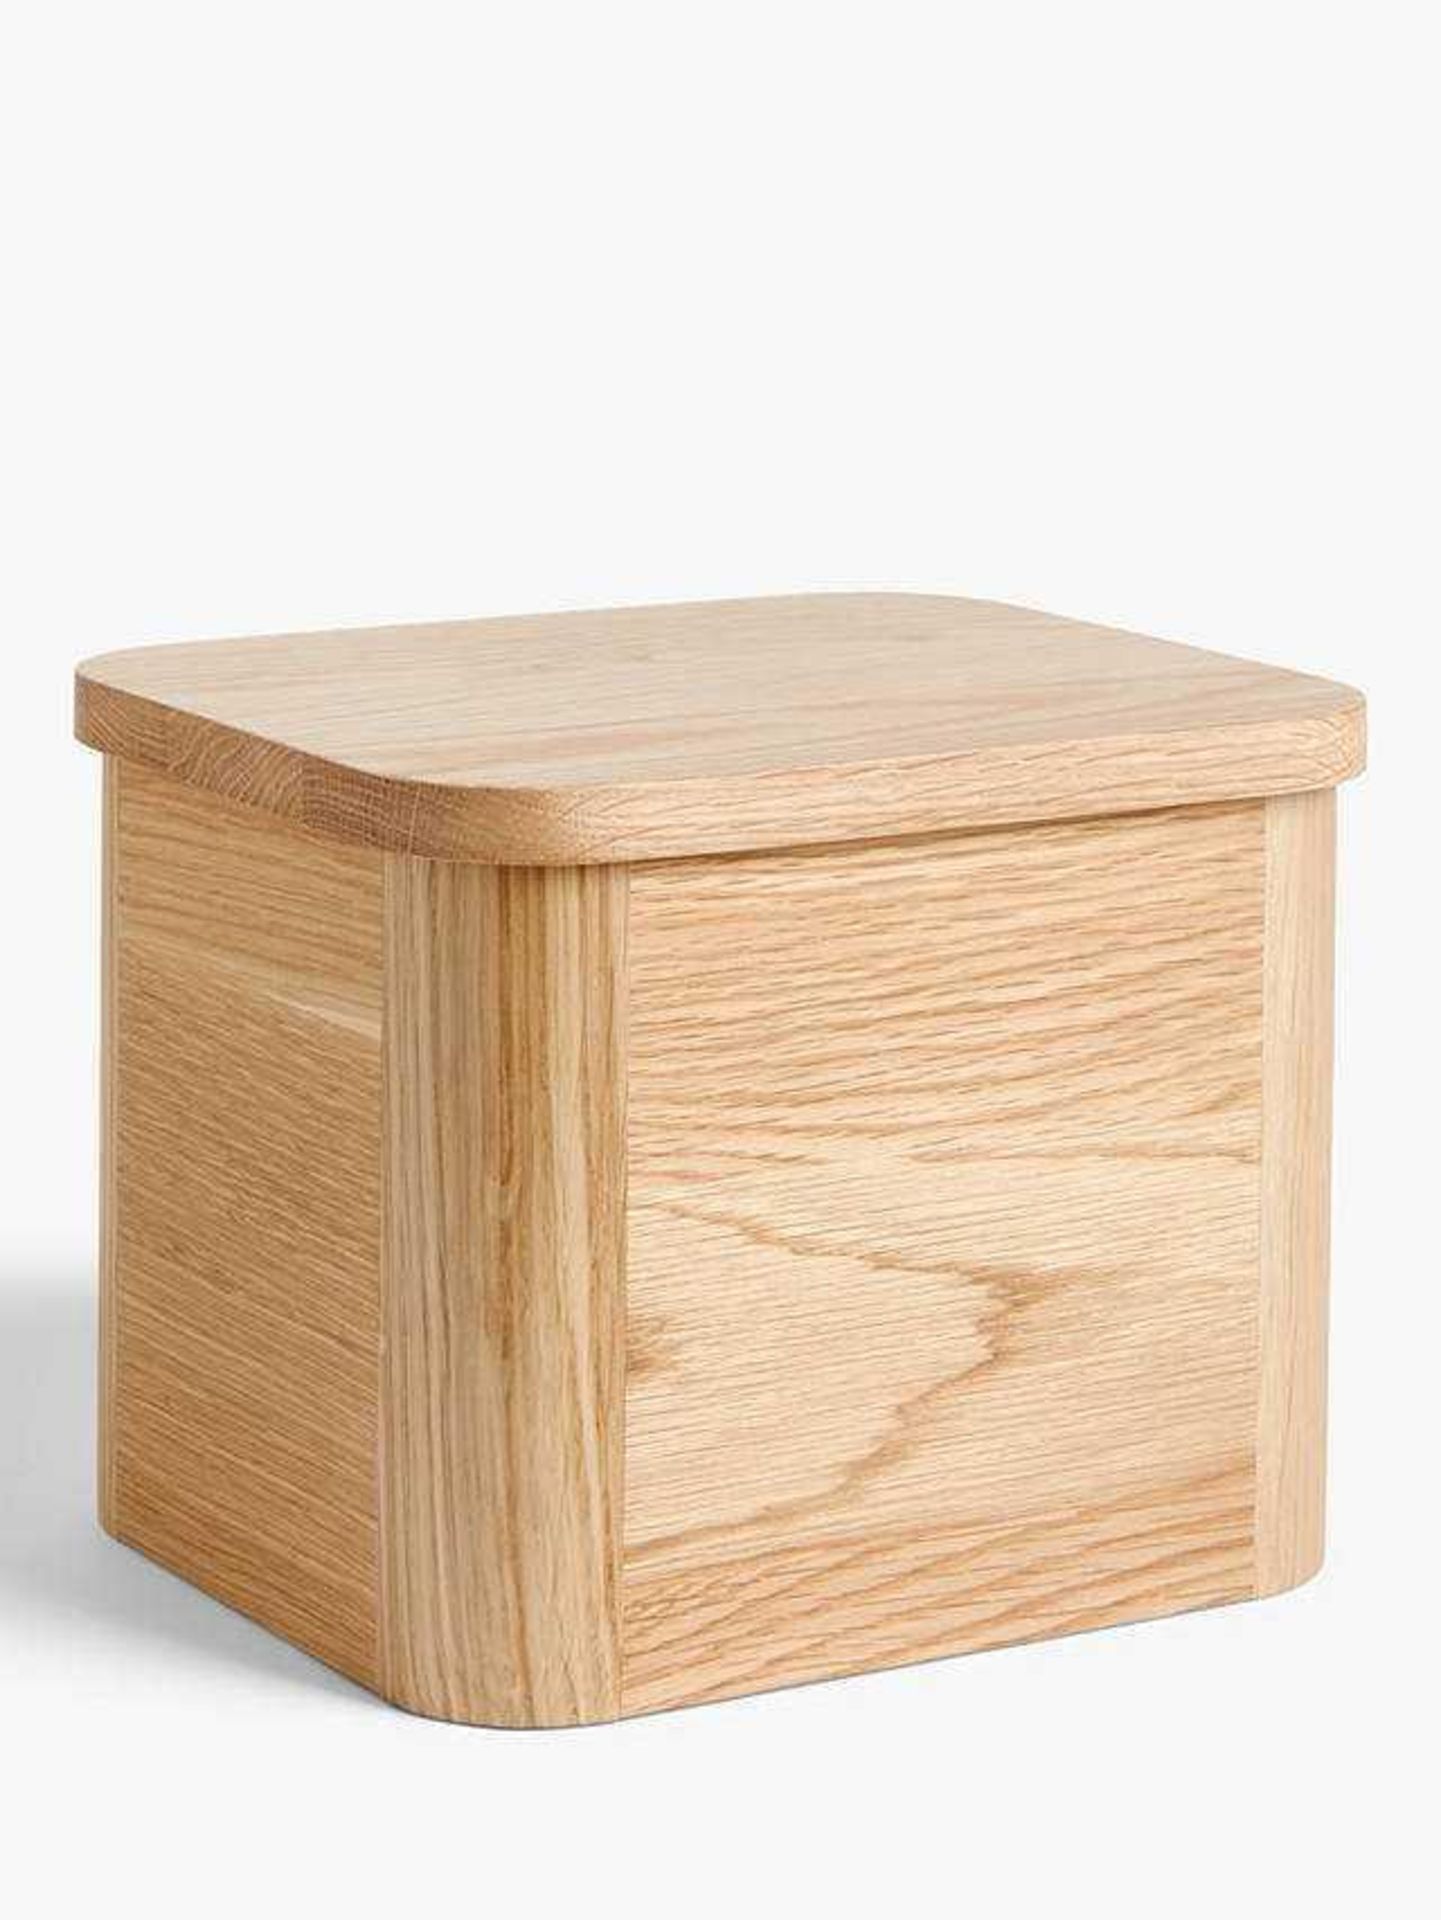 Combined RRP £195 Lot. To Contain 2 Large John Lewis Wooden Oak Bread Bins,1 Small Wooden Oak Bread - Image 3 of 4